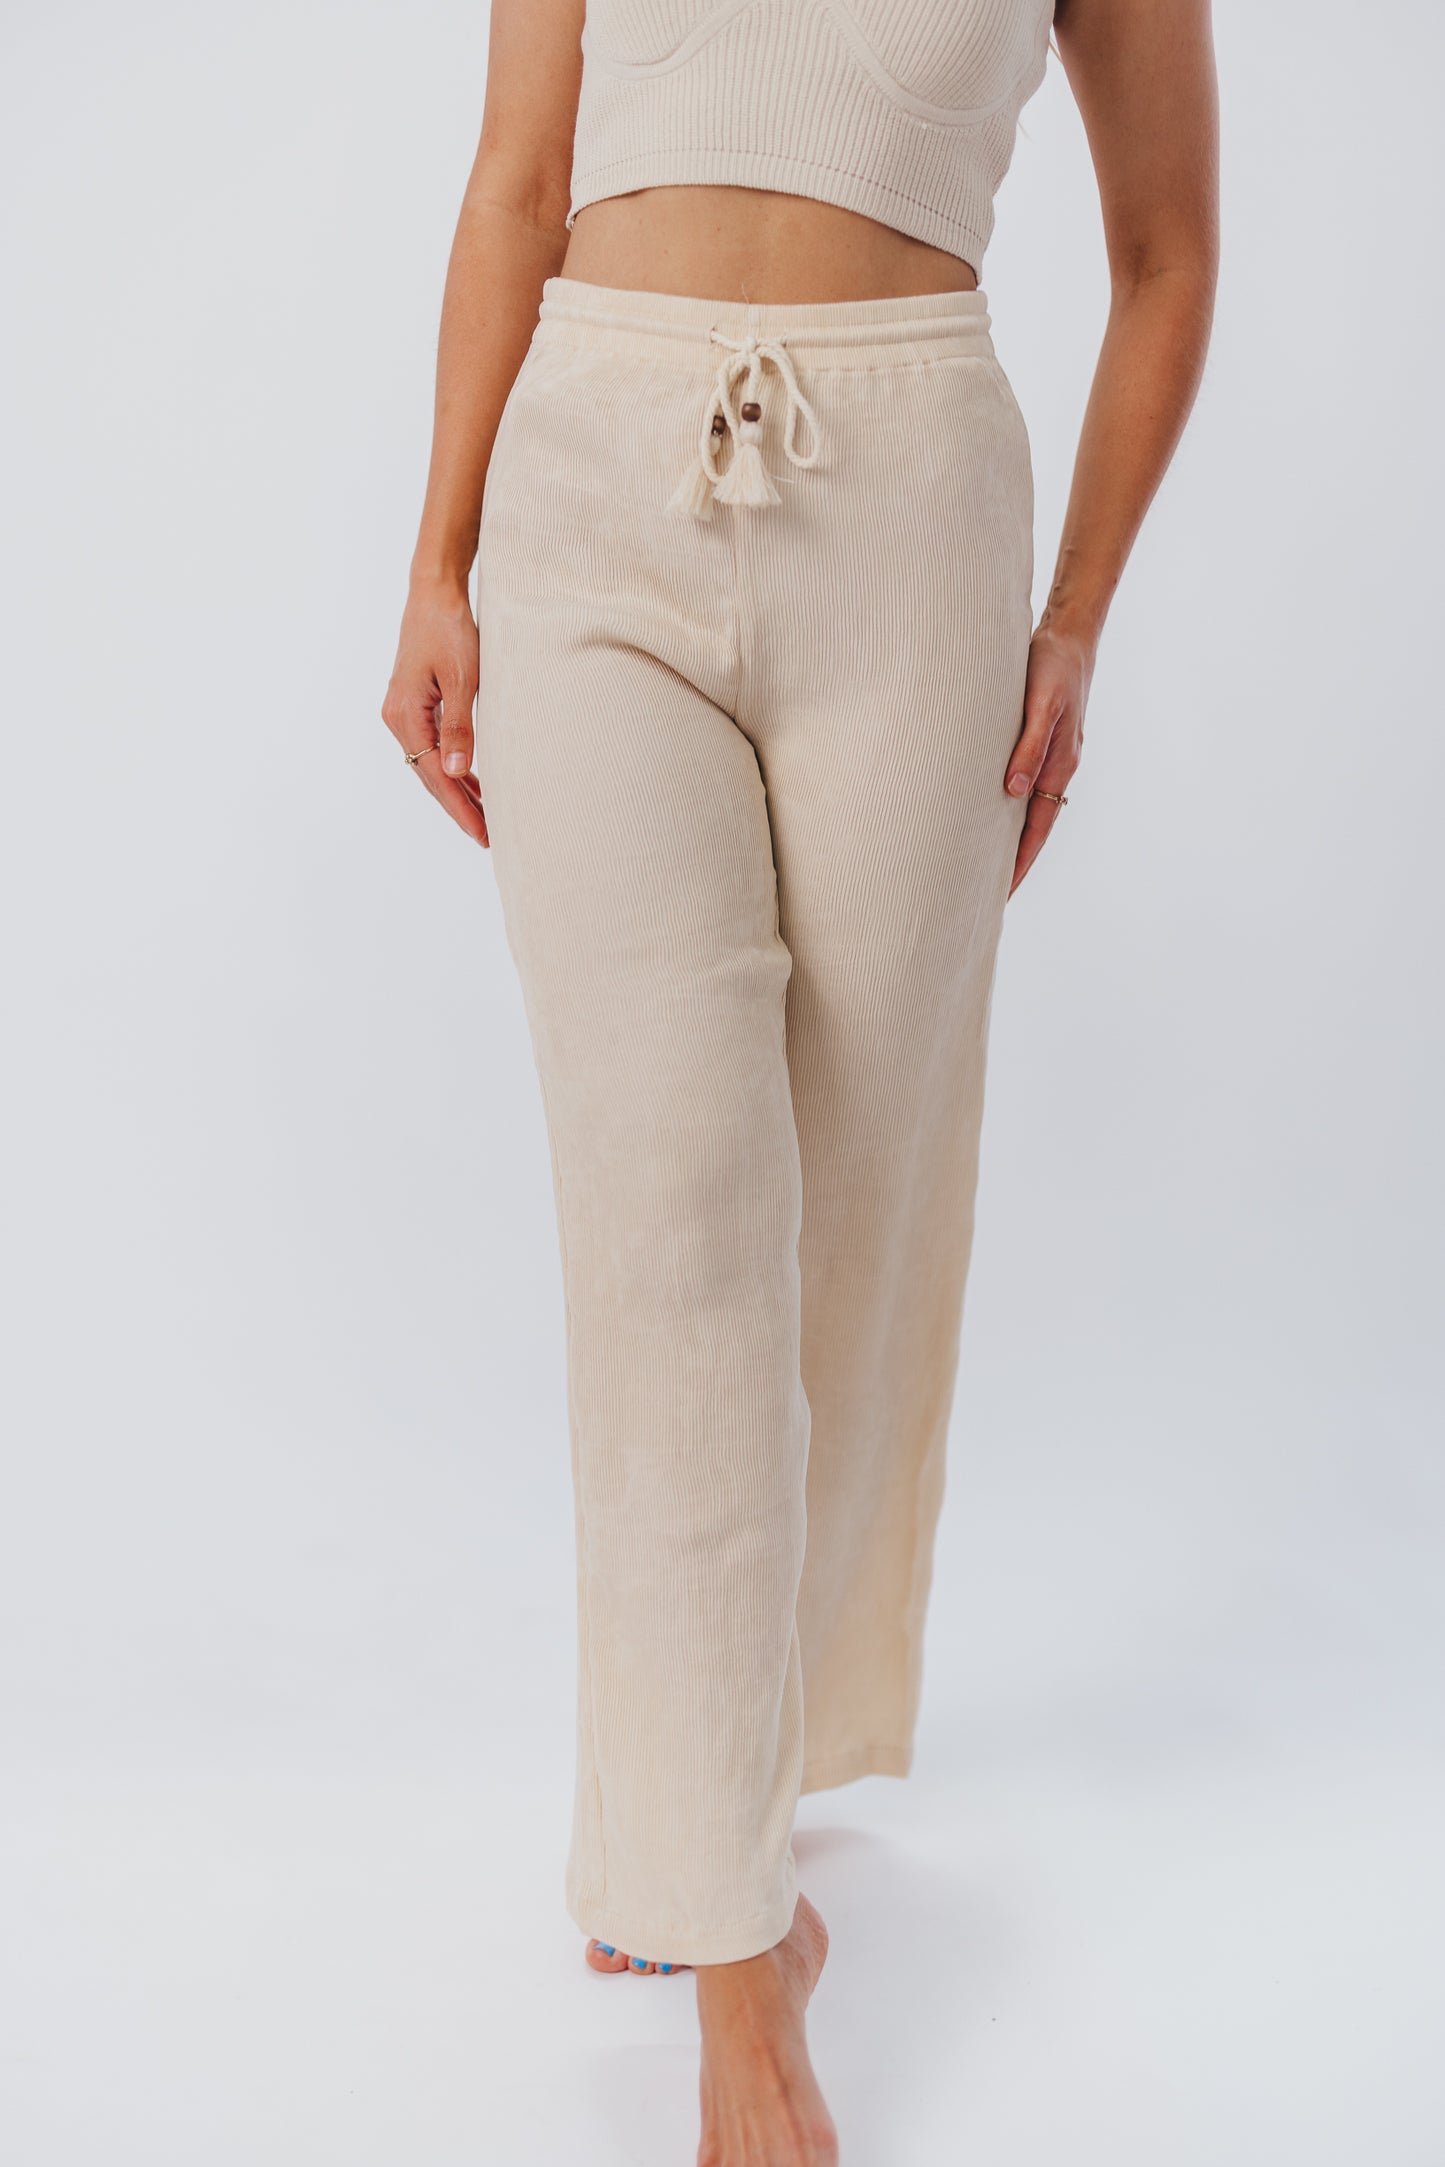 Stacy Knit Pants in Natural